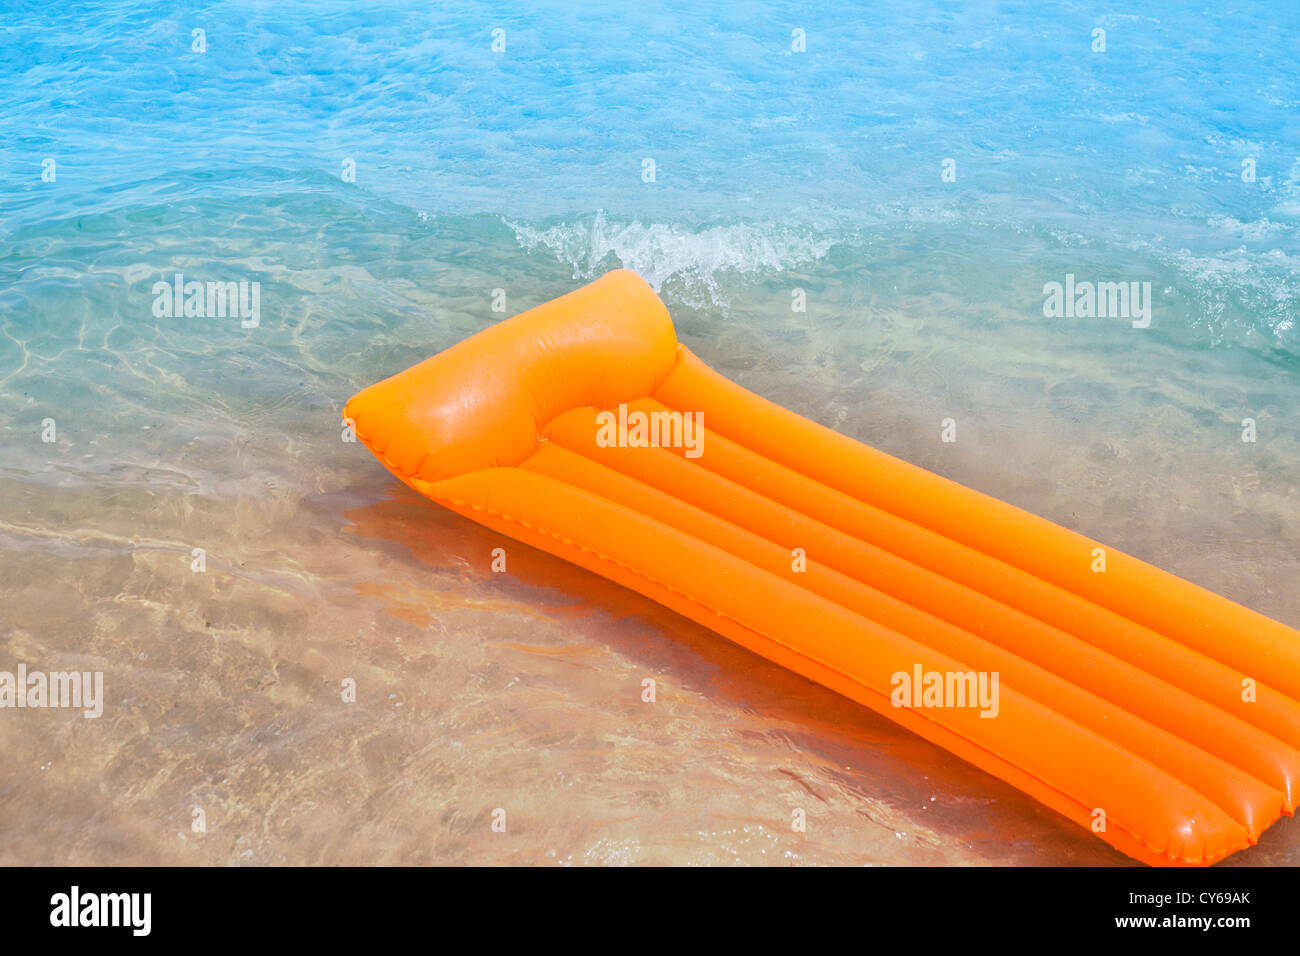 Beach shore with orange floating lounge and waves over sand bottom Stock Photo